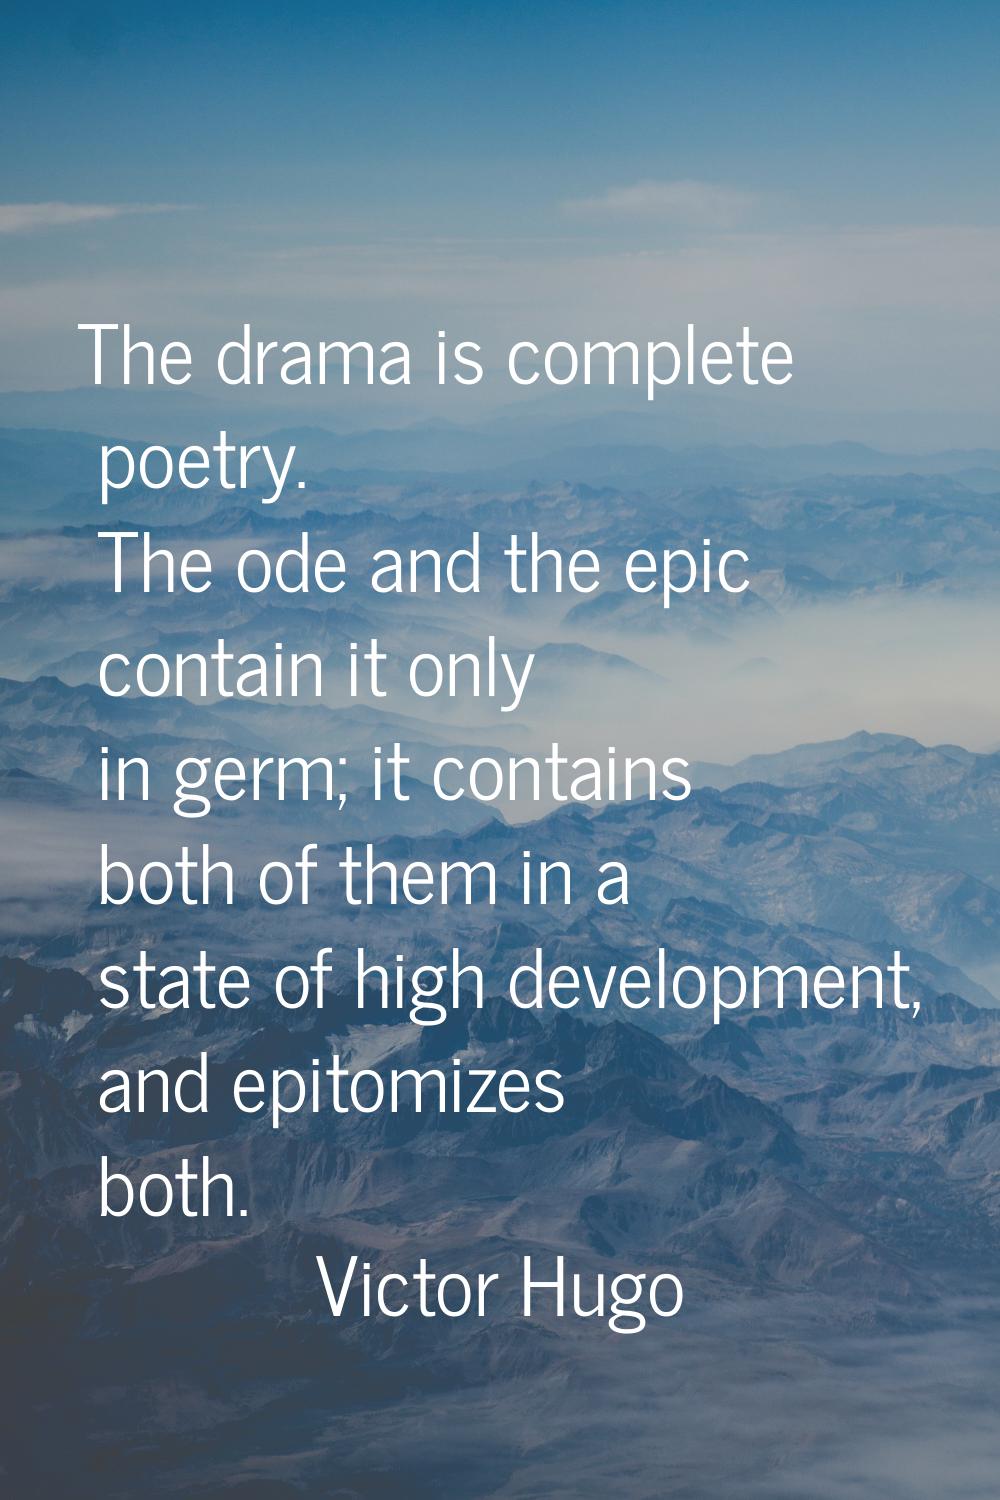 The drama is complete poetry. The ode and the epic contain it only in germ; it contains both of the